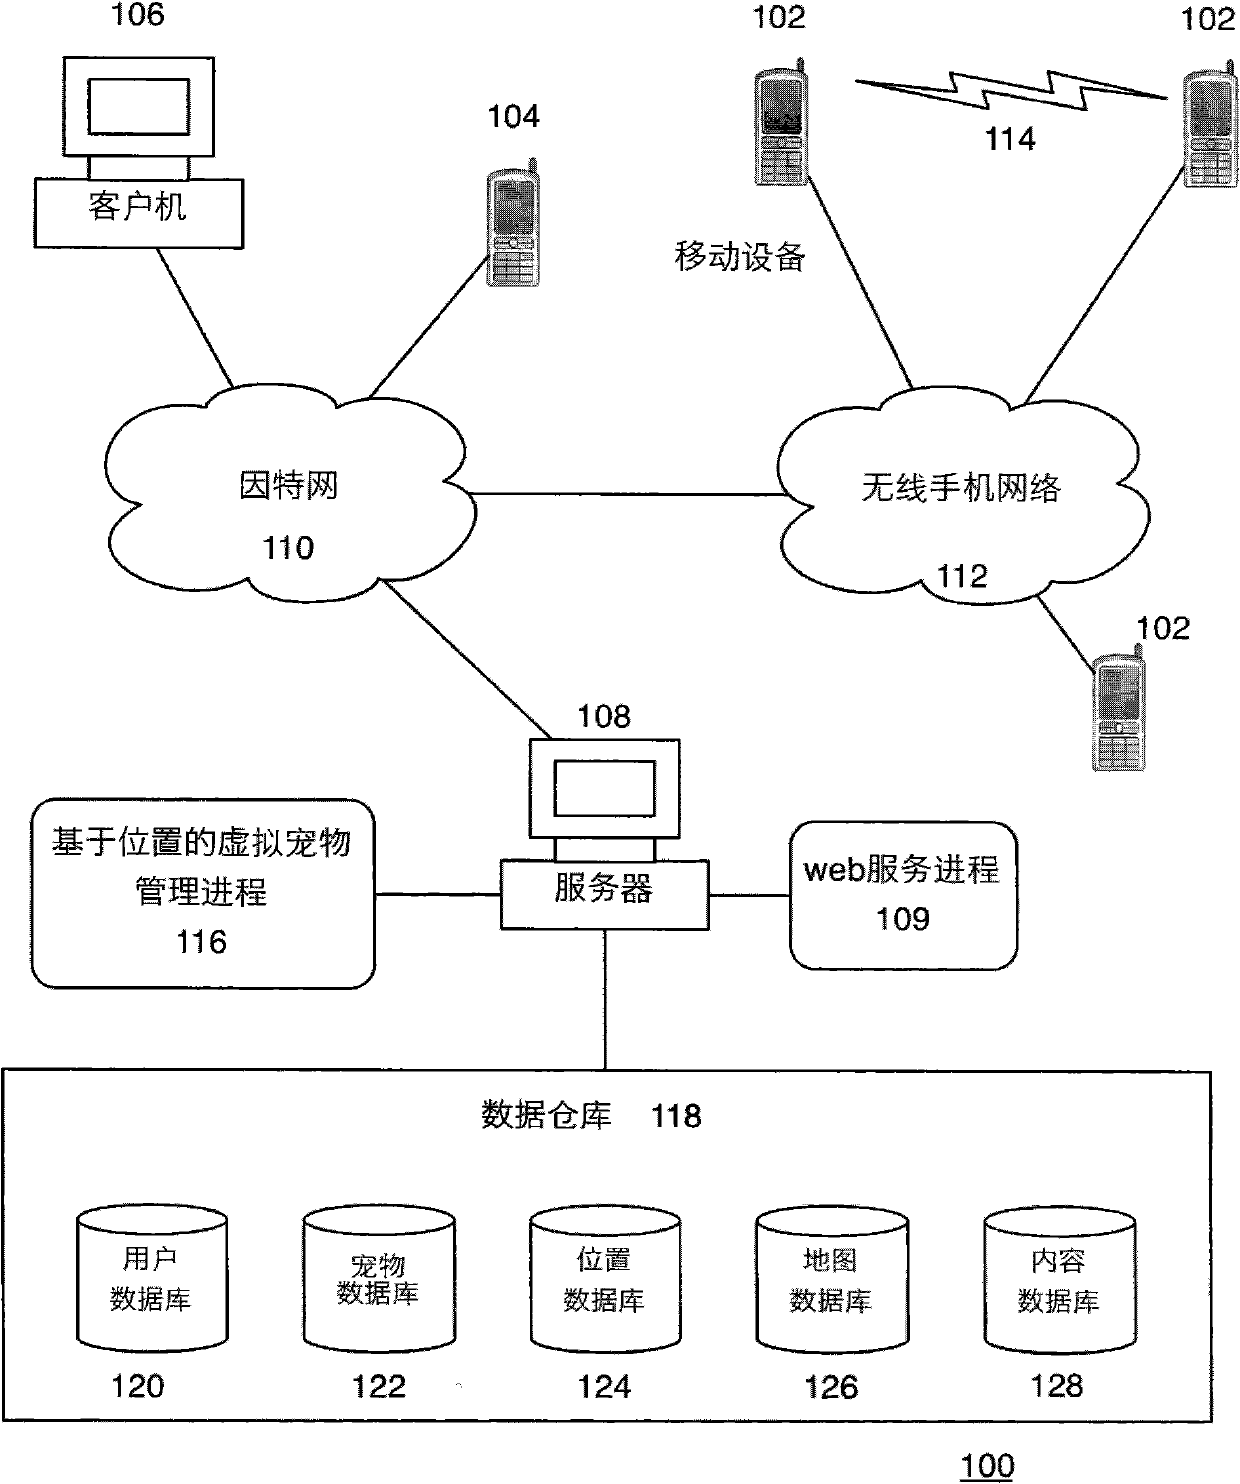 Location-based mobile virtual pet system and method thereof